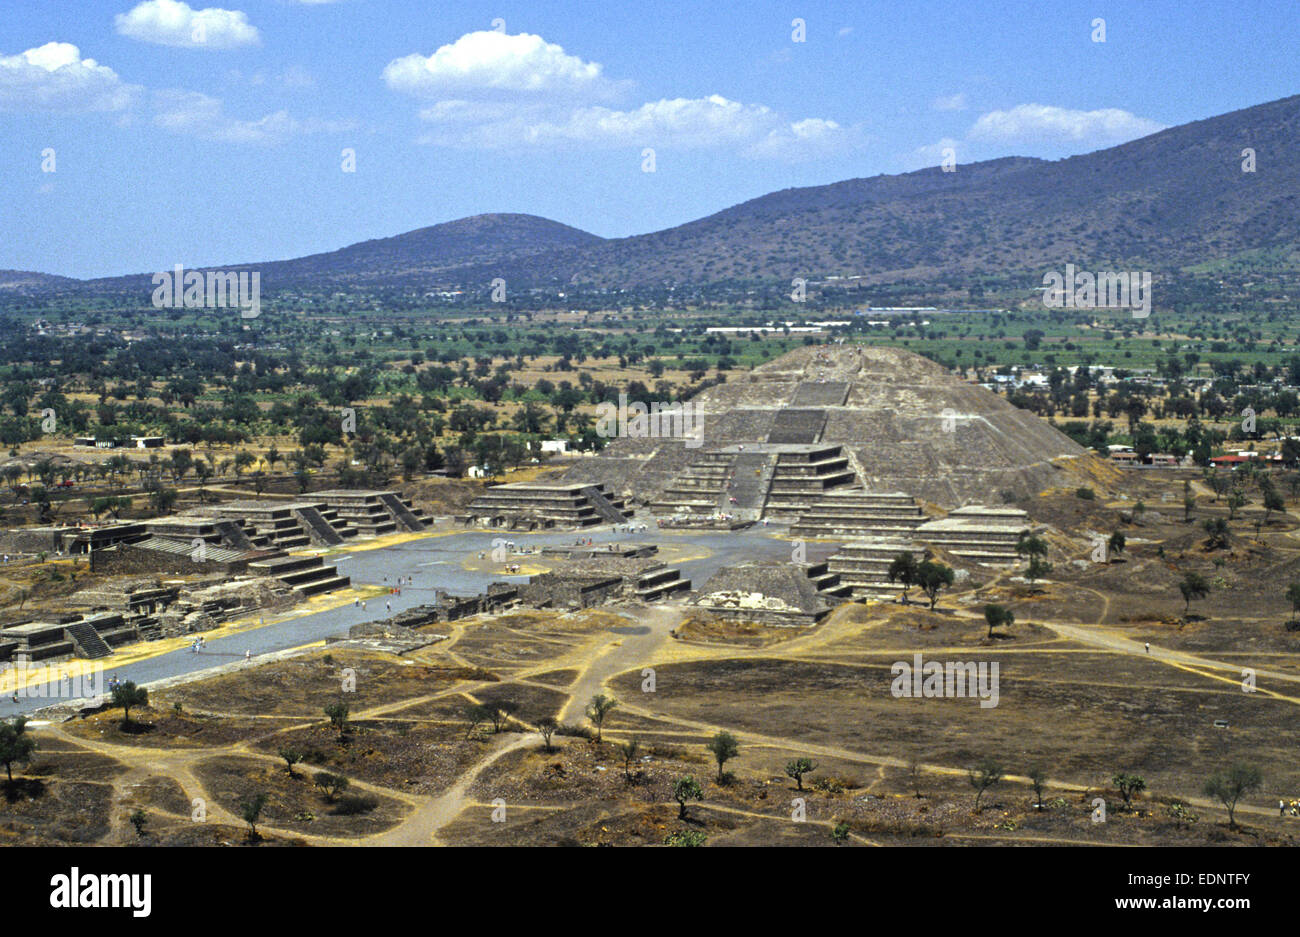 Mexico - Teotihuacan - the Avenue of The Dead stretches out towards the Pyramid of The Moon (centre of image).  The holy city of Teotihuacan ('the place where the gods were created') is situated some 50 km north-east of Mexico City. Built between the 1st and 7th centuries A.D., it is characterized by the vast size of its monuments – in particular, the Temple of Quetzalcoatl and the Pyramids of the Sun and the Moon, laid out on geometric and symbolic principles. As one of the most powerful cultural centres in Mesoamerica, Teotihuacan extended its cultural and artistic influence throughout the r Stock Photo